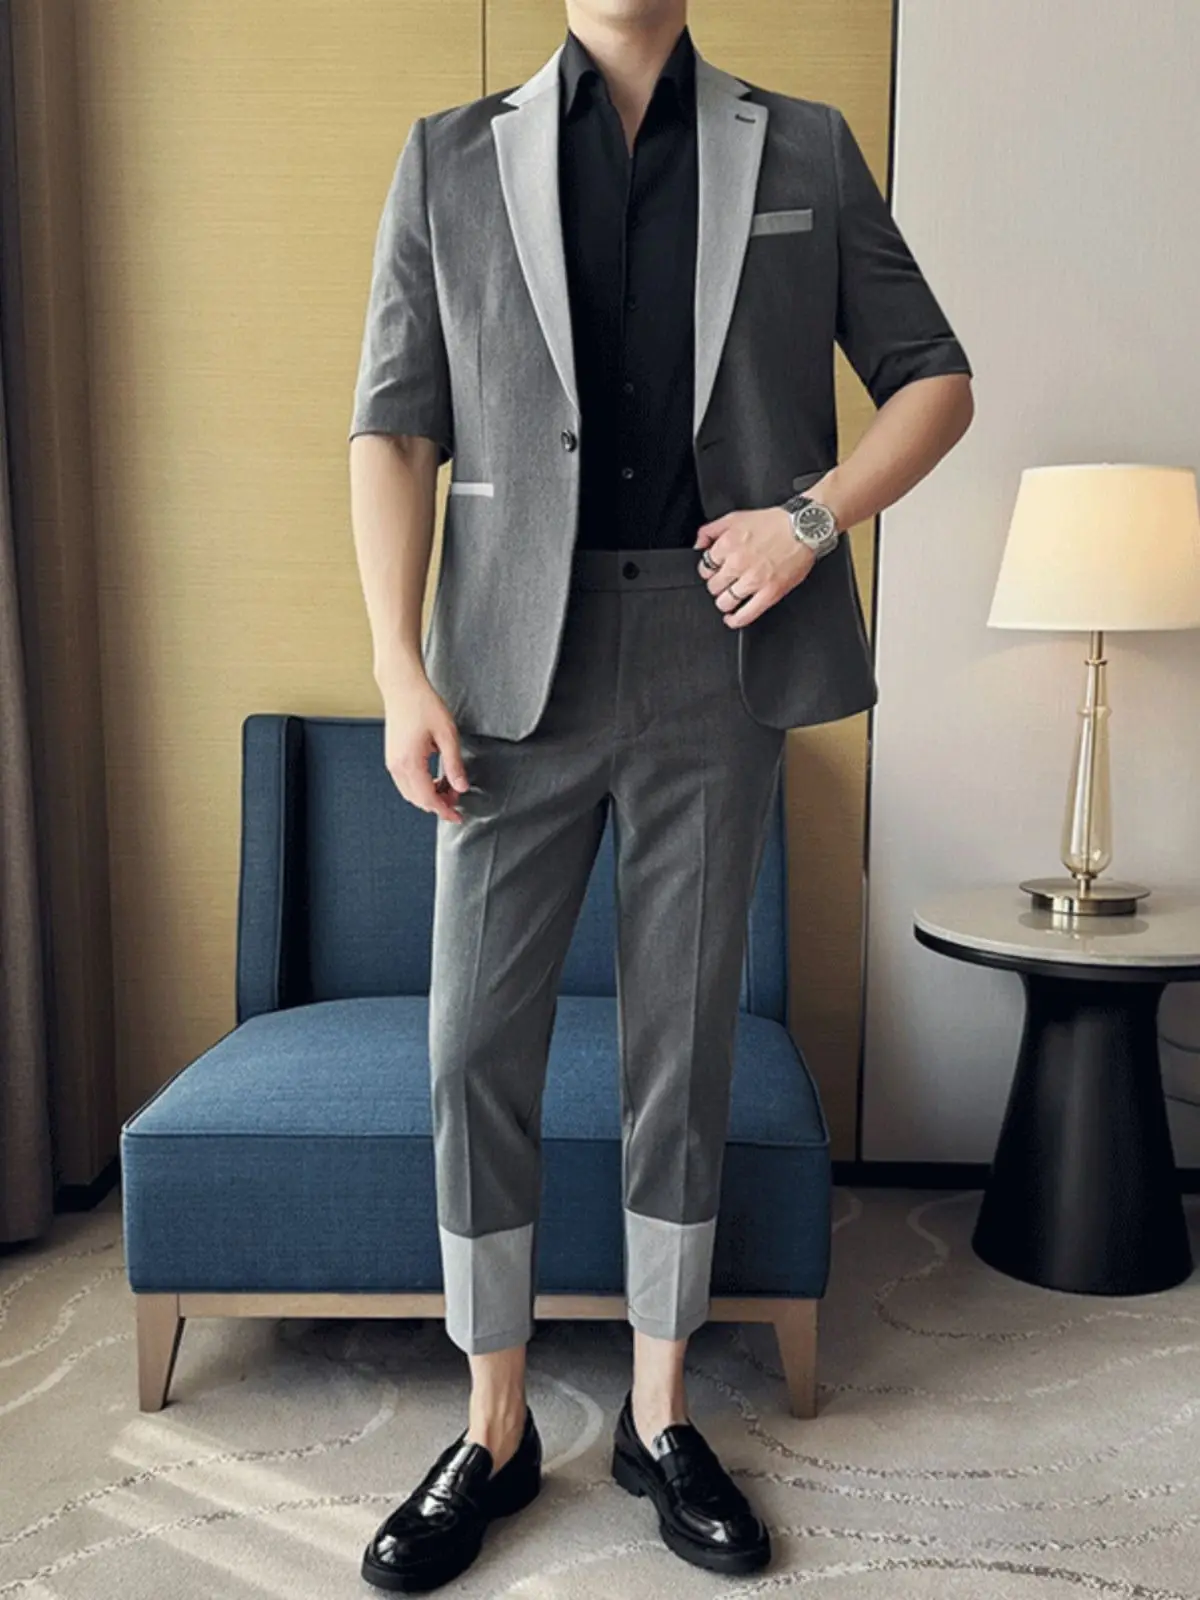 

3-A38 Commuting simple thin casual three-quarter sleeve suit men's high-end handsmall suit street-blasting nine-point pants suit